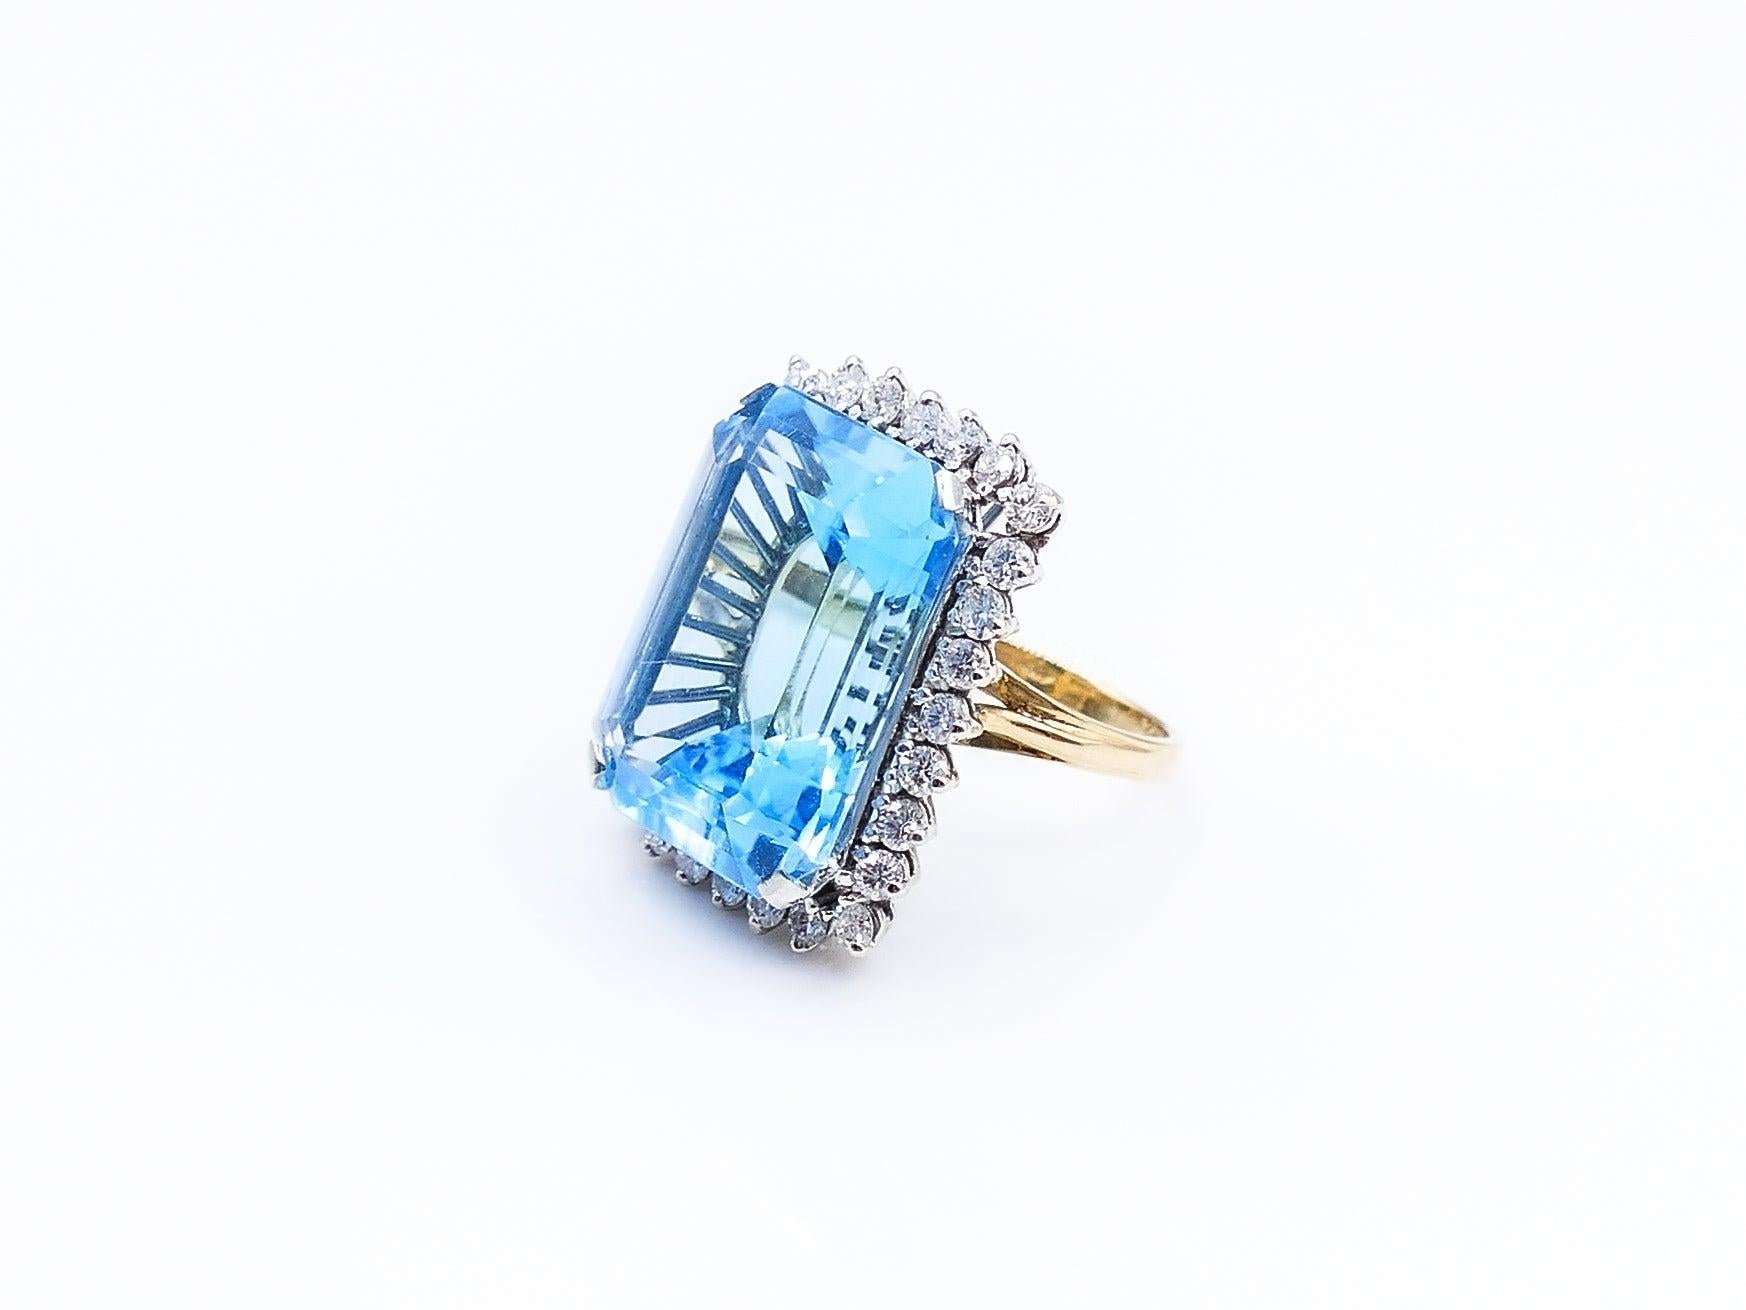 This bright and beautiful emerald cut London Blue Topaz, weighing in at 18 carats, is surrounded by 28 small round cut prong set diamonds totaling approximately 1.5 carats. The face of the ring is set in 18K white gold while the band is 18K yellow